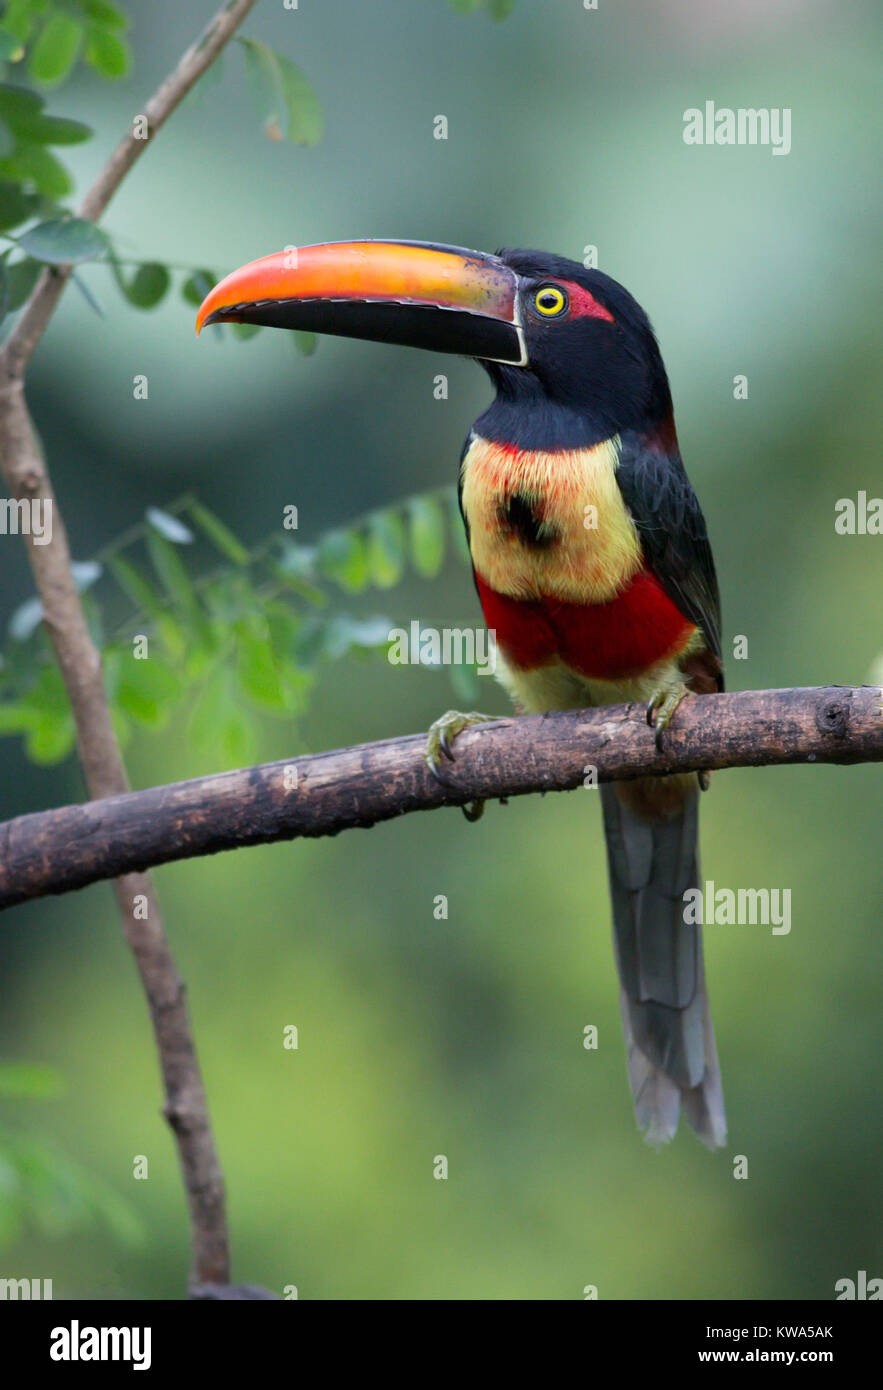 Fiery-billed Aracari perched on a branch Stock Photo